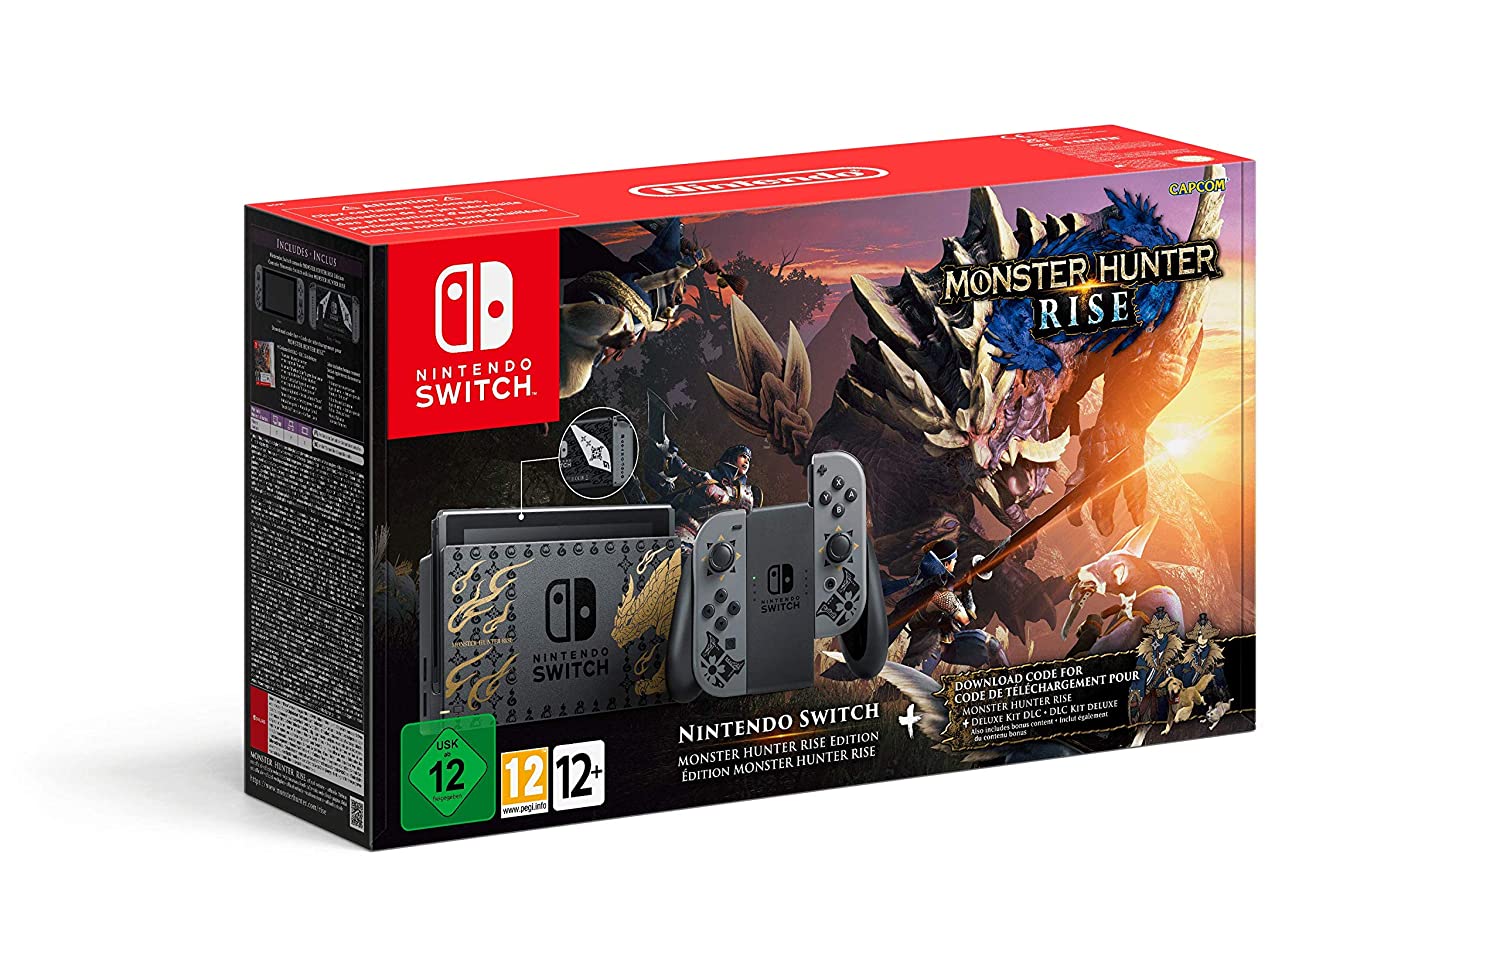 Nintendo Switch Console - Monster Hunter Rise Edition (Switch), Nintendo